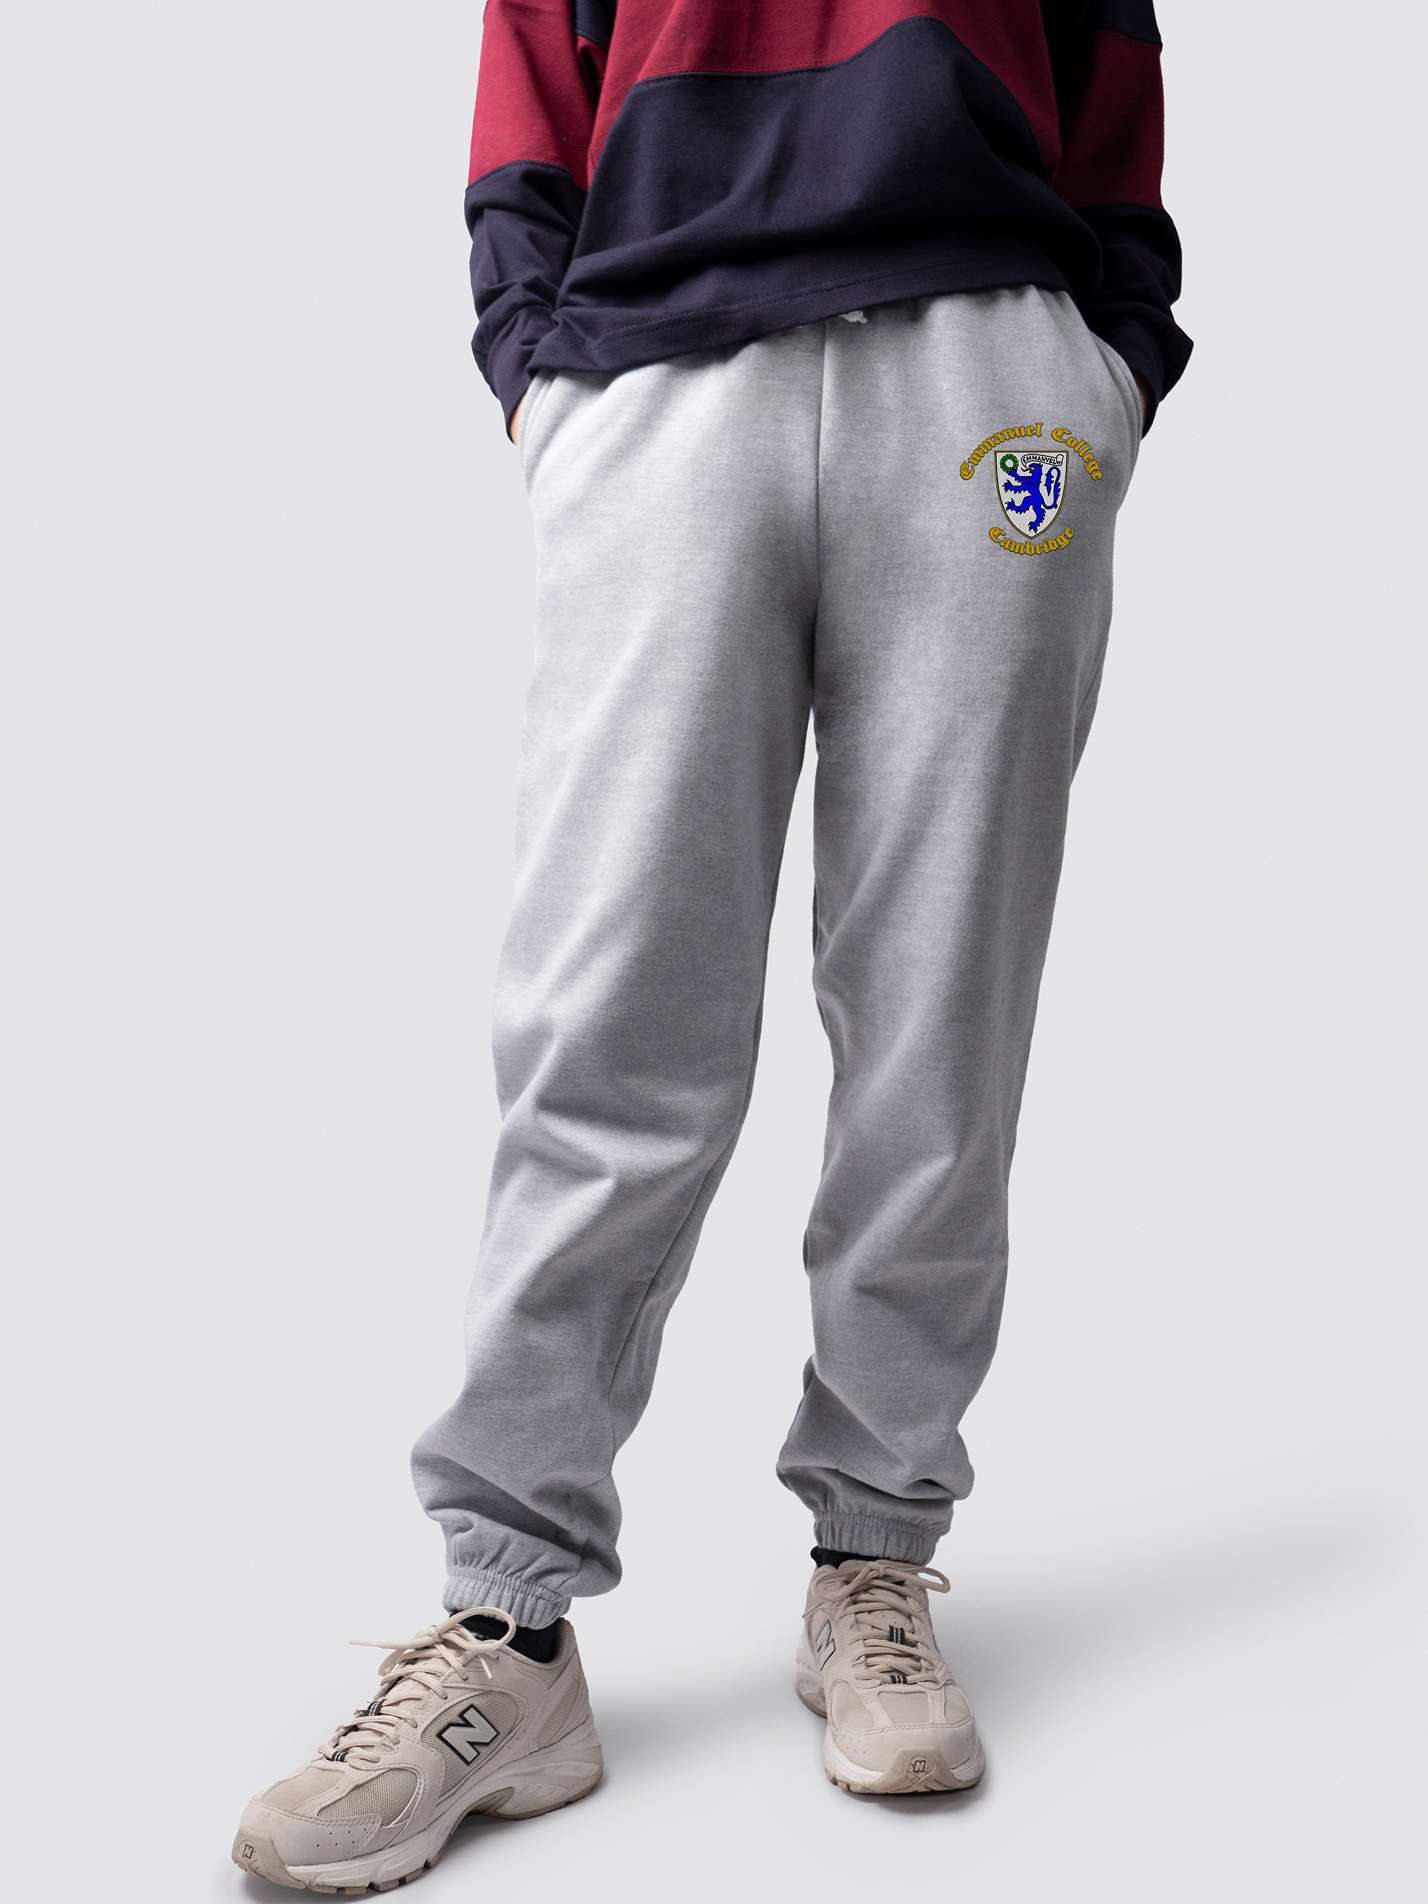 undergraduate cuffed sweatpants, made from soft cotton fabric, with Emmanuel logo